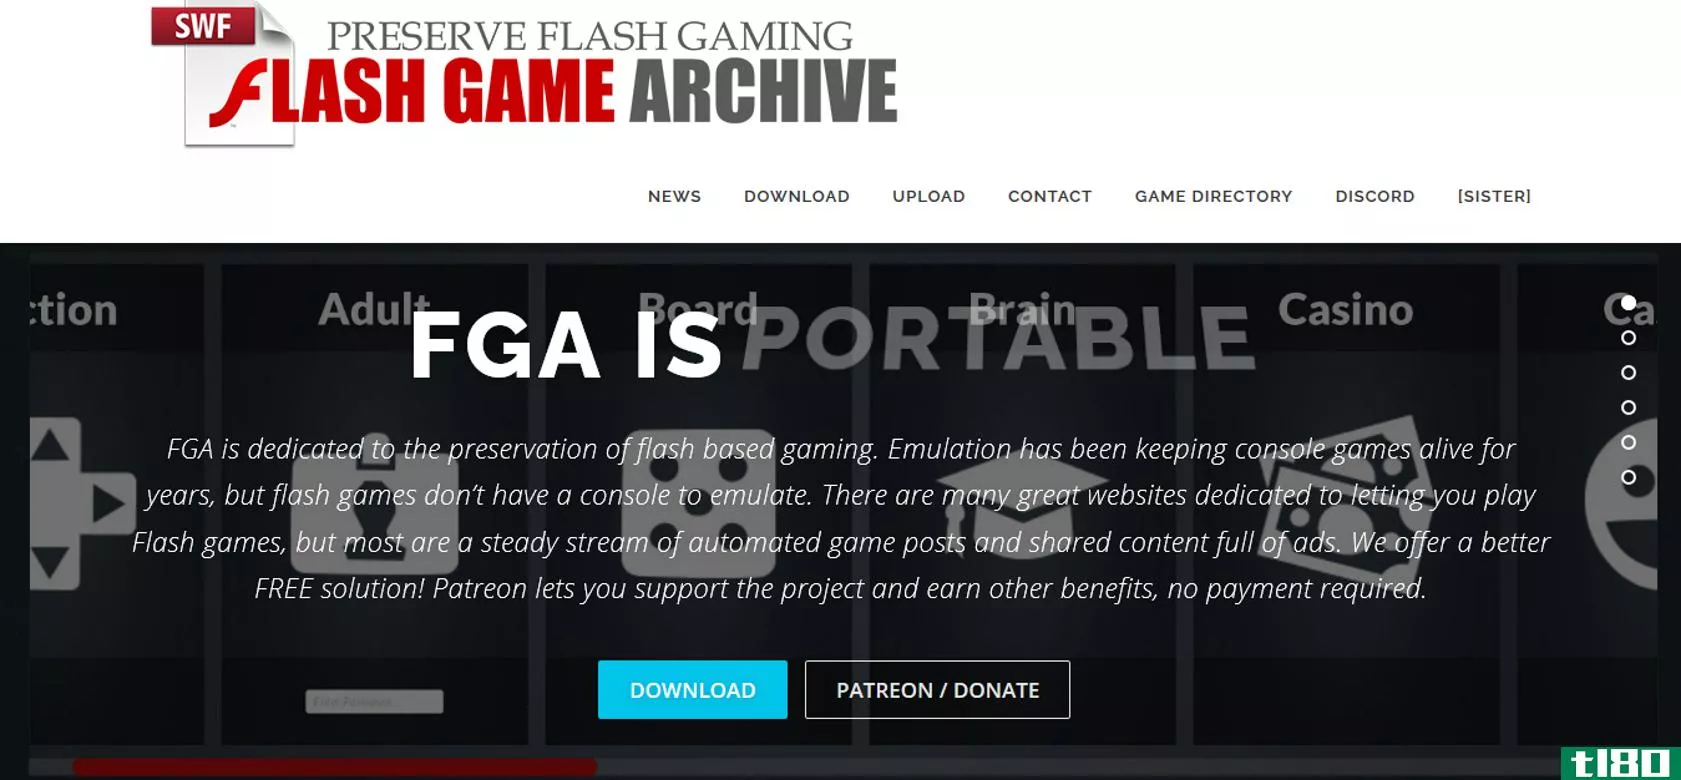 A screenshot of Flash Game Archive's home page